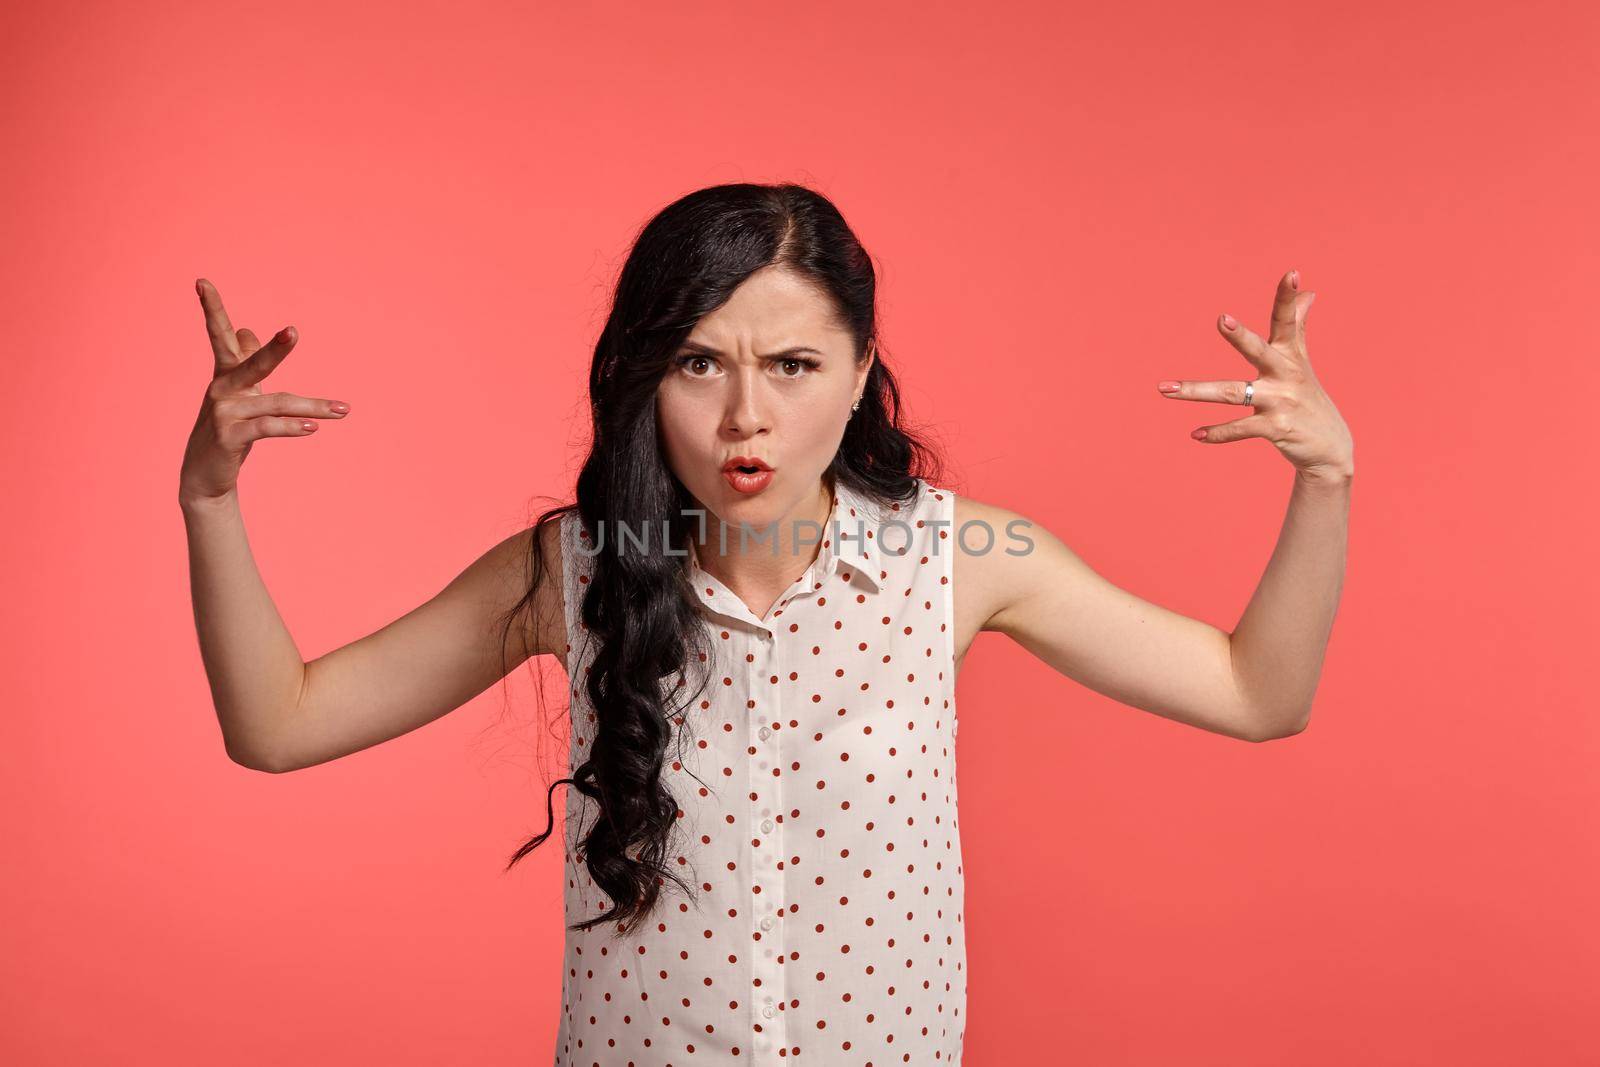 Studio shot of a good-looking teen lady, wearing casual white polka dot blouse. Little brunette female gesticulating while posing over a pink background. People and sincere emotions.